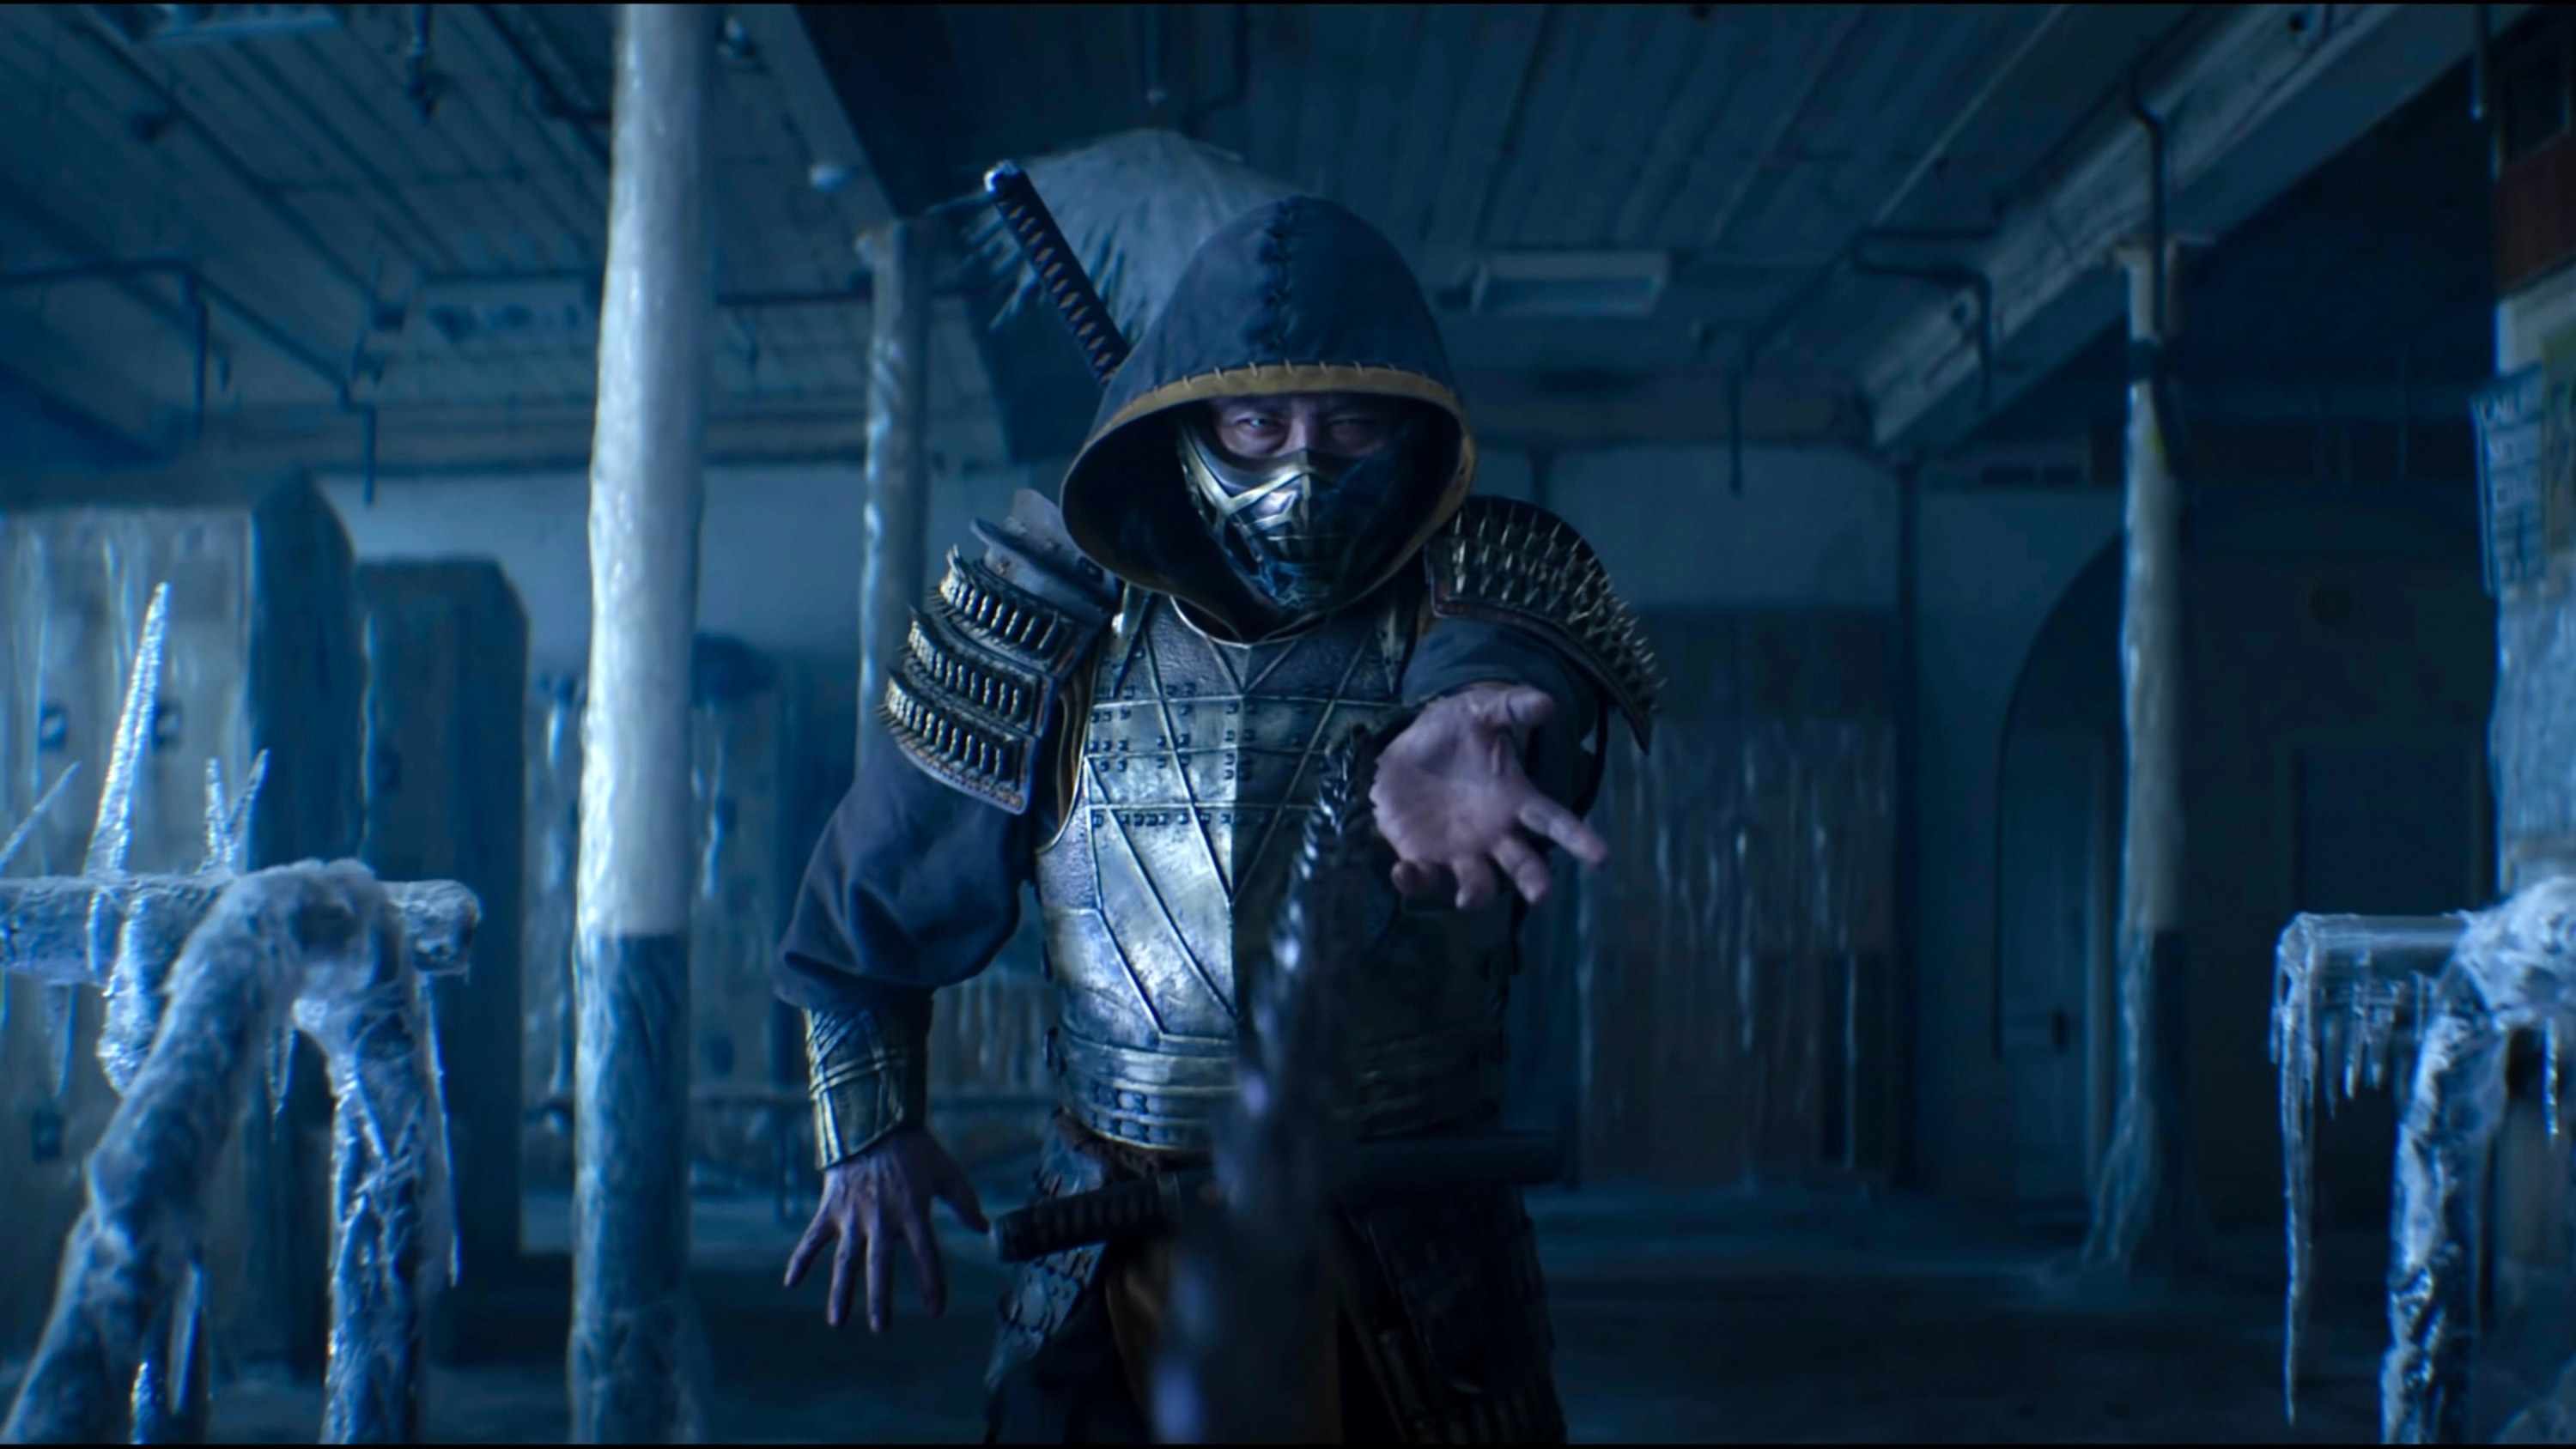 Scorpion shoots a spiked chain out of his sleeve in a frozen room